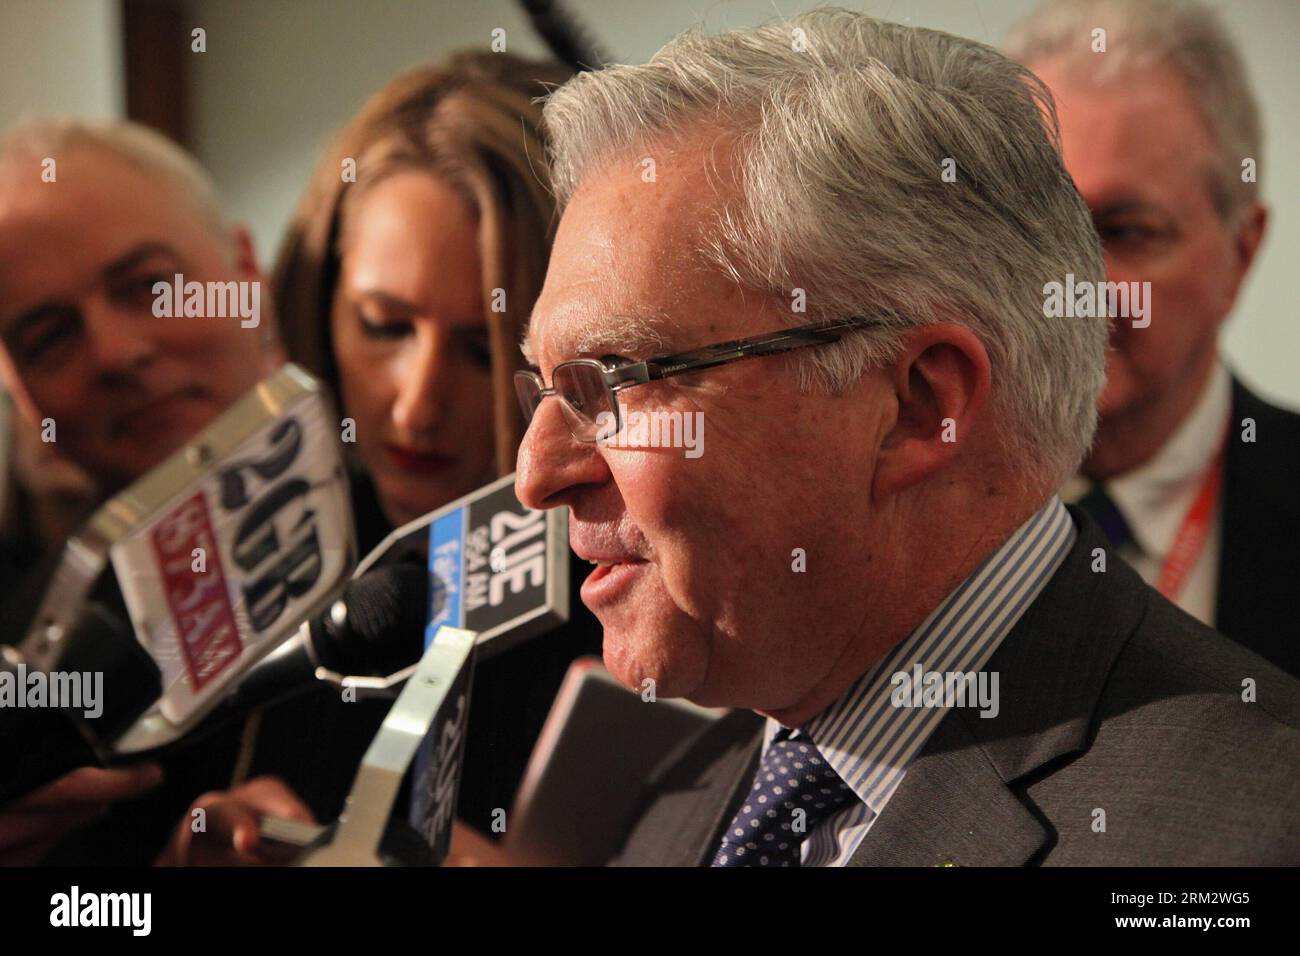 Bildnummer: 59907072  Datum: 26.06.2013  Copyright: imago/Xinhua (130627) -- CANBERRA, June 26, 2013 (Xinhua) -- Australian Labor Party Returning Officer Chris Hayes announces that former leader Kevin Rudd has won the caucus ballot over incumbent Prime Minister Julia Gillard at Parliament House in Canberra, Australia, June 26, 2013. Kevin Rudd was sworn in as prime minister of Australia on June 26 following his victory in a ruling Labor party caucus ballot the evening before. (Xinhua/Justin Qian) AUSTRALIA-CANBERRA-KEVIN RUDD-BALLOT-WIN PUBLICATIONxNOTxINxCHN People Politik AUS xcb x0x 2013 qu Stock Photo